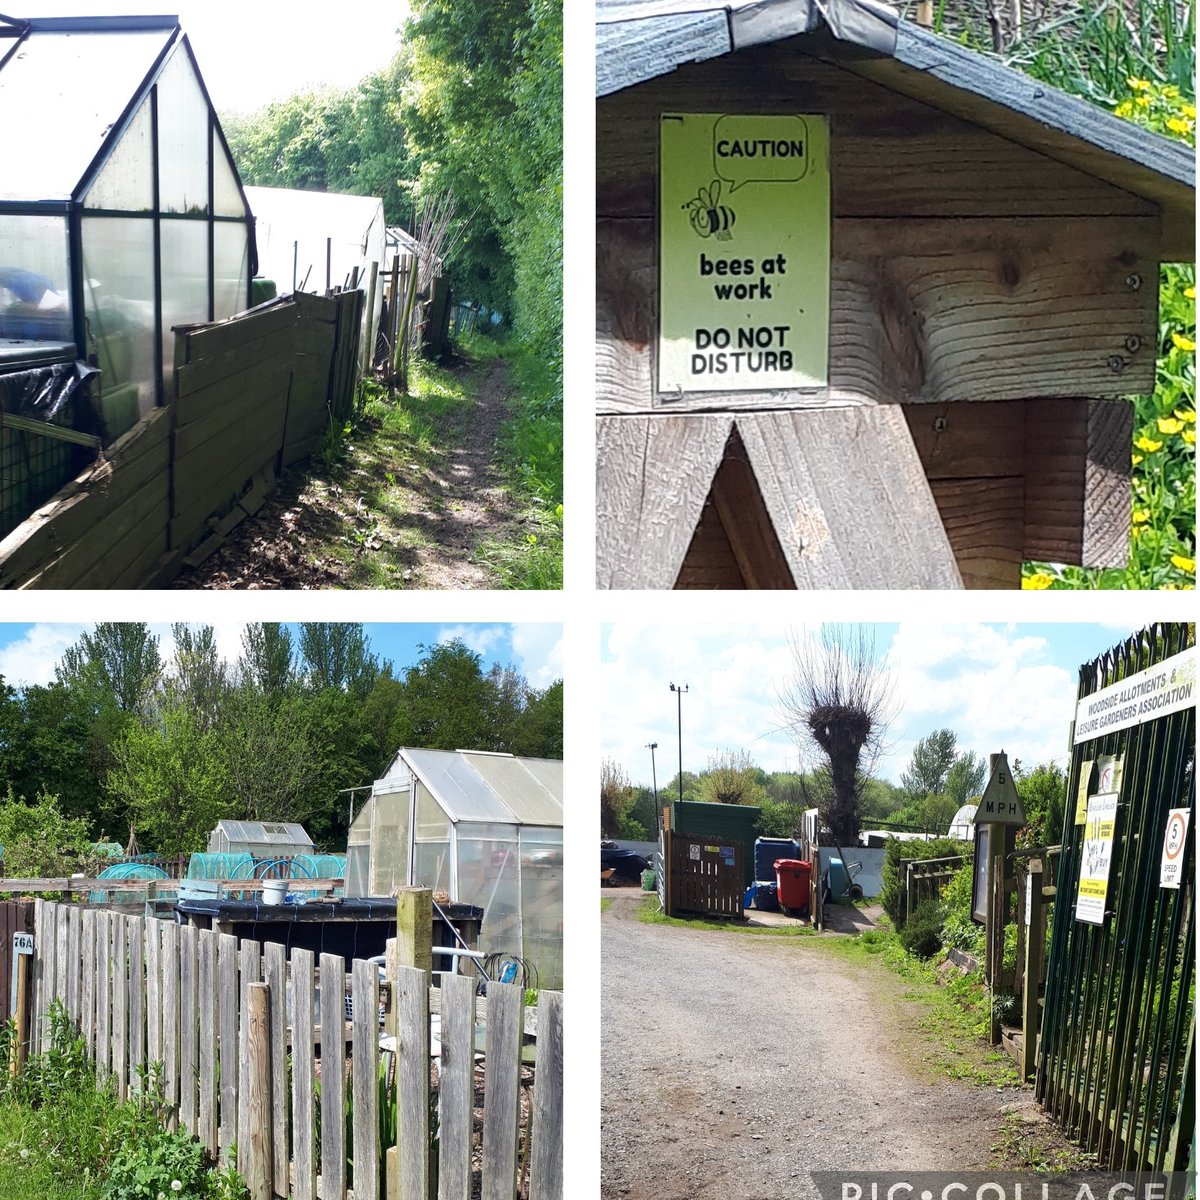 SNT Woodside and Madeley out on foot patrol at Woodside Allotments Lots of people making the most of the nice weather. Lots of people to talk to. #communityengagement.